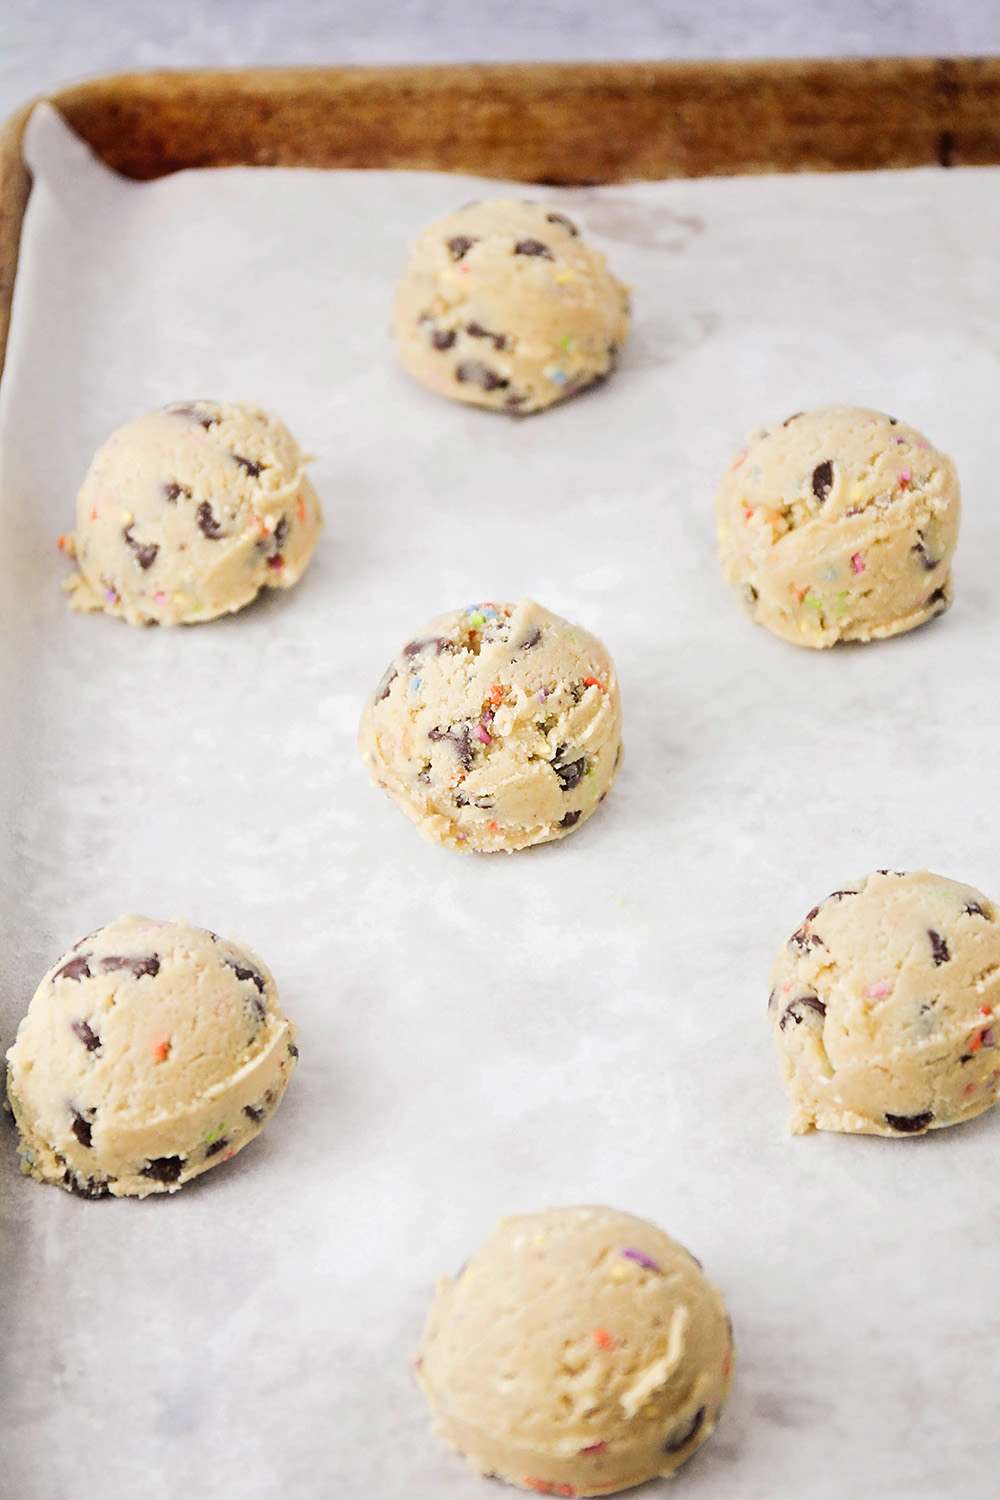 These birthday cake chocolate chip cookies have such a delicious combination of flavors, and are so colorful and fun!